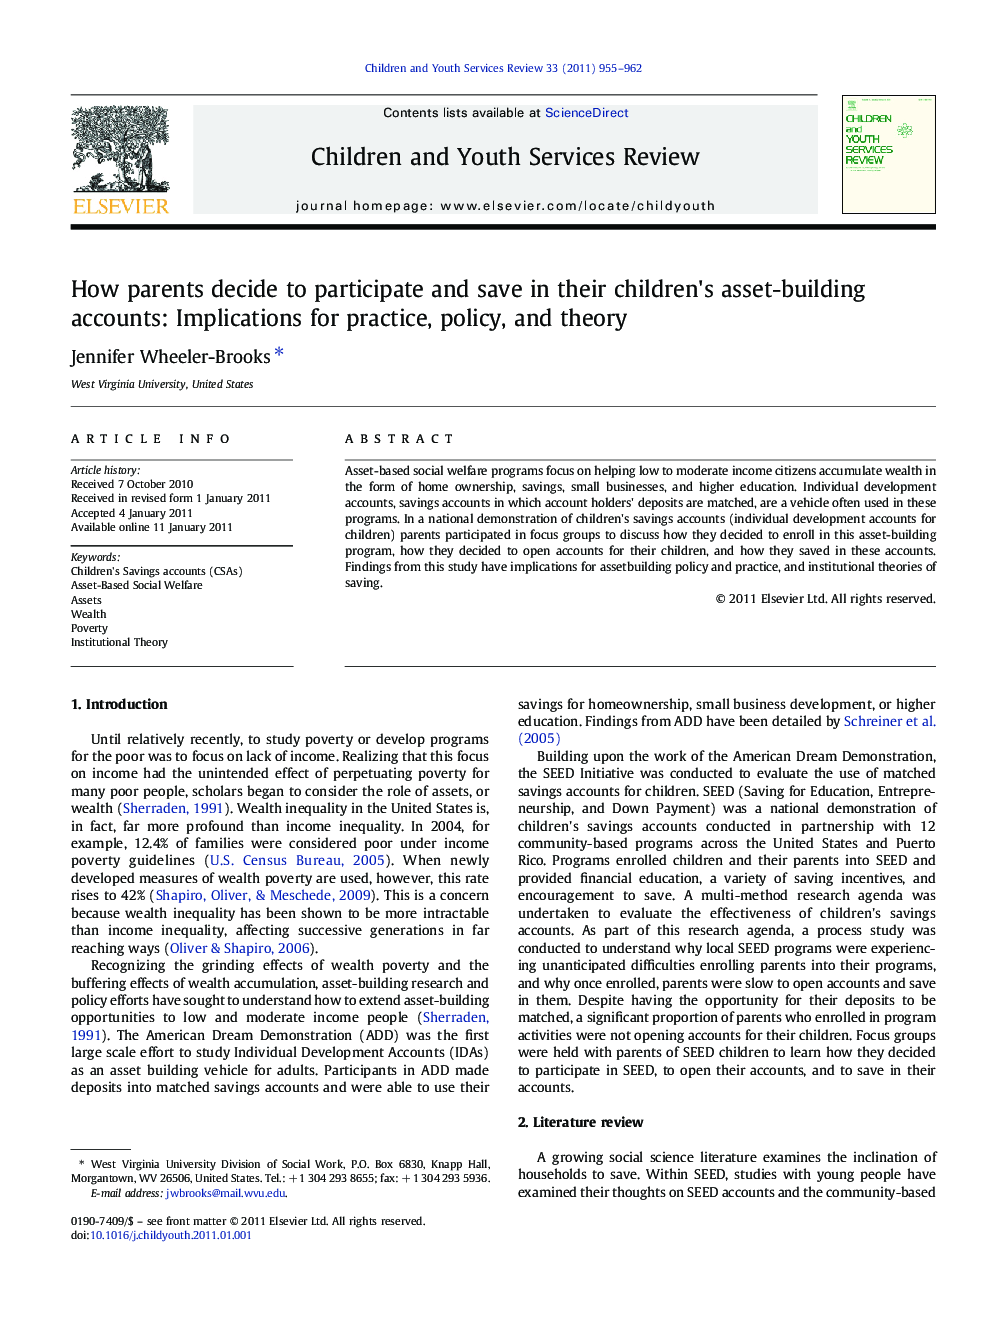 How parents decide to participate and save in their children's asset-building accounts: Implications for practice, policy, and theory